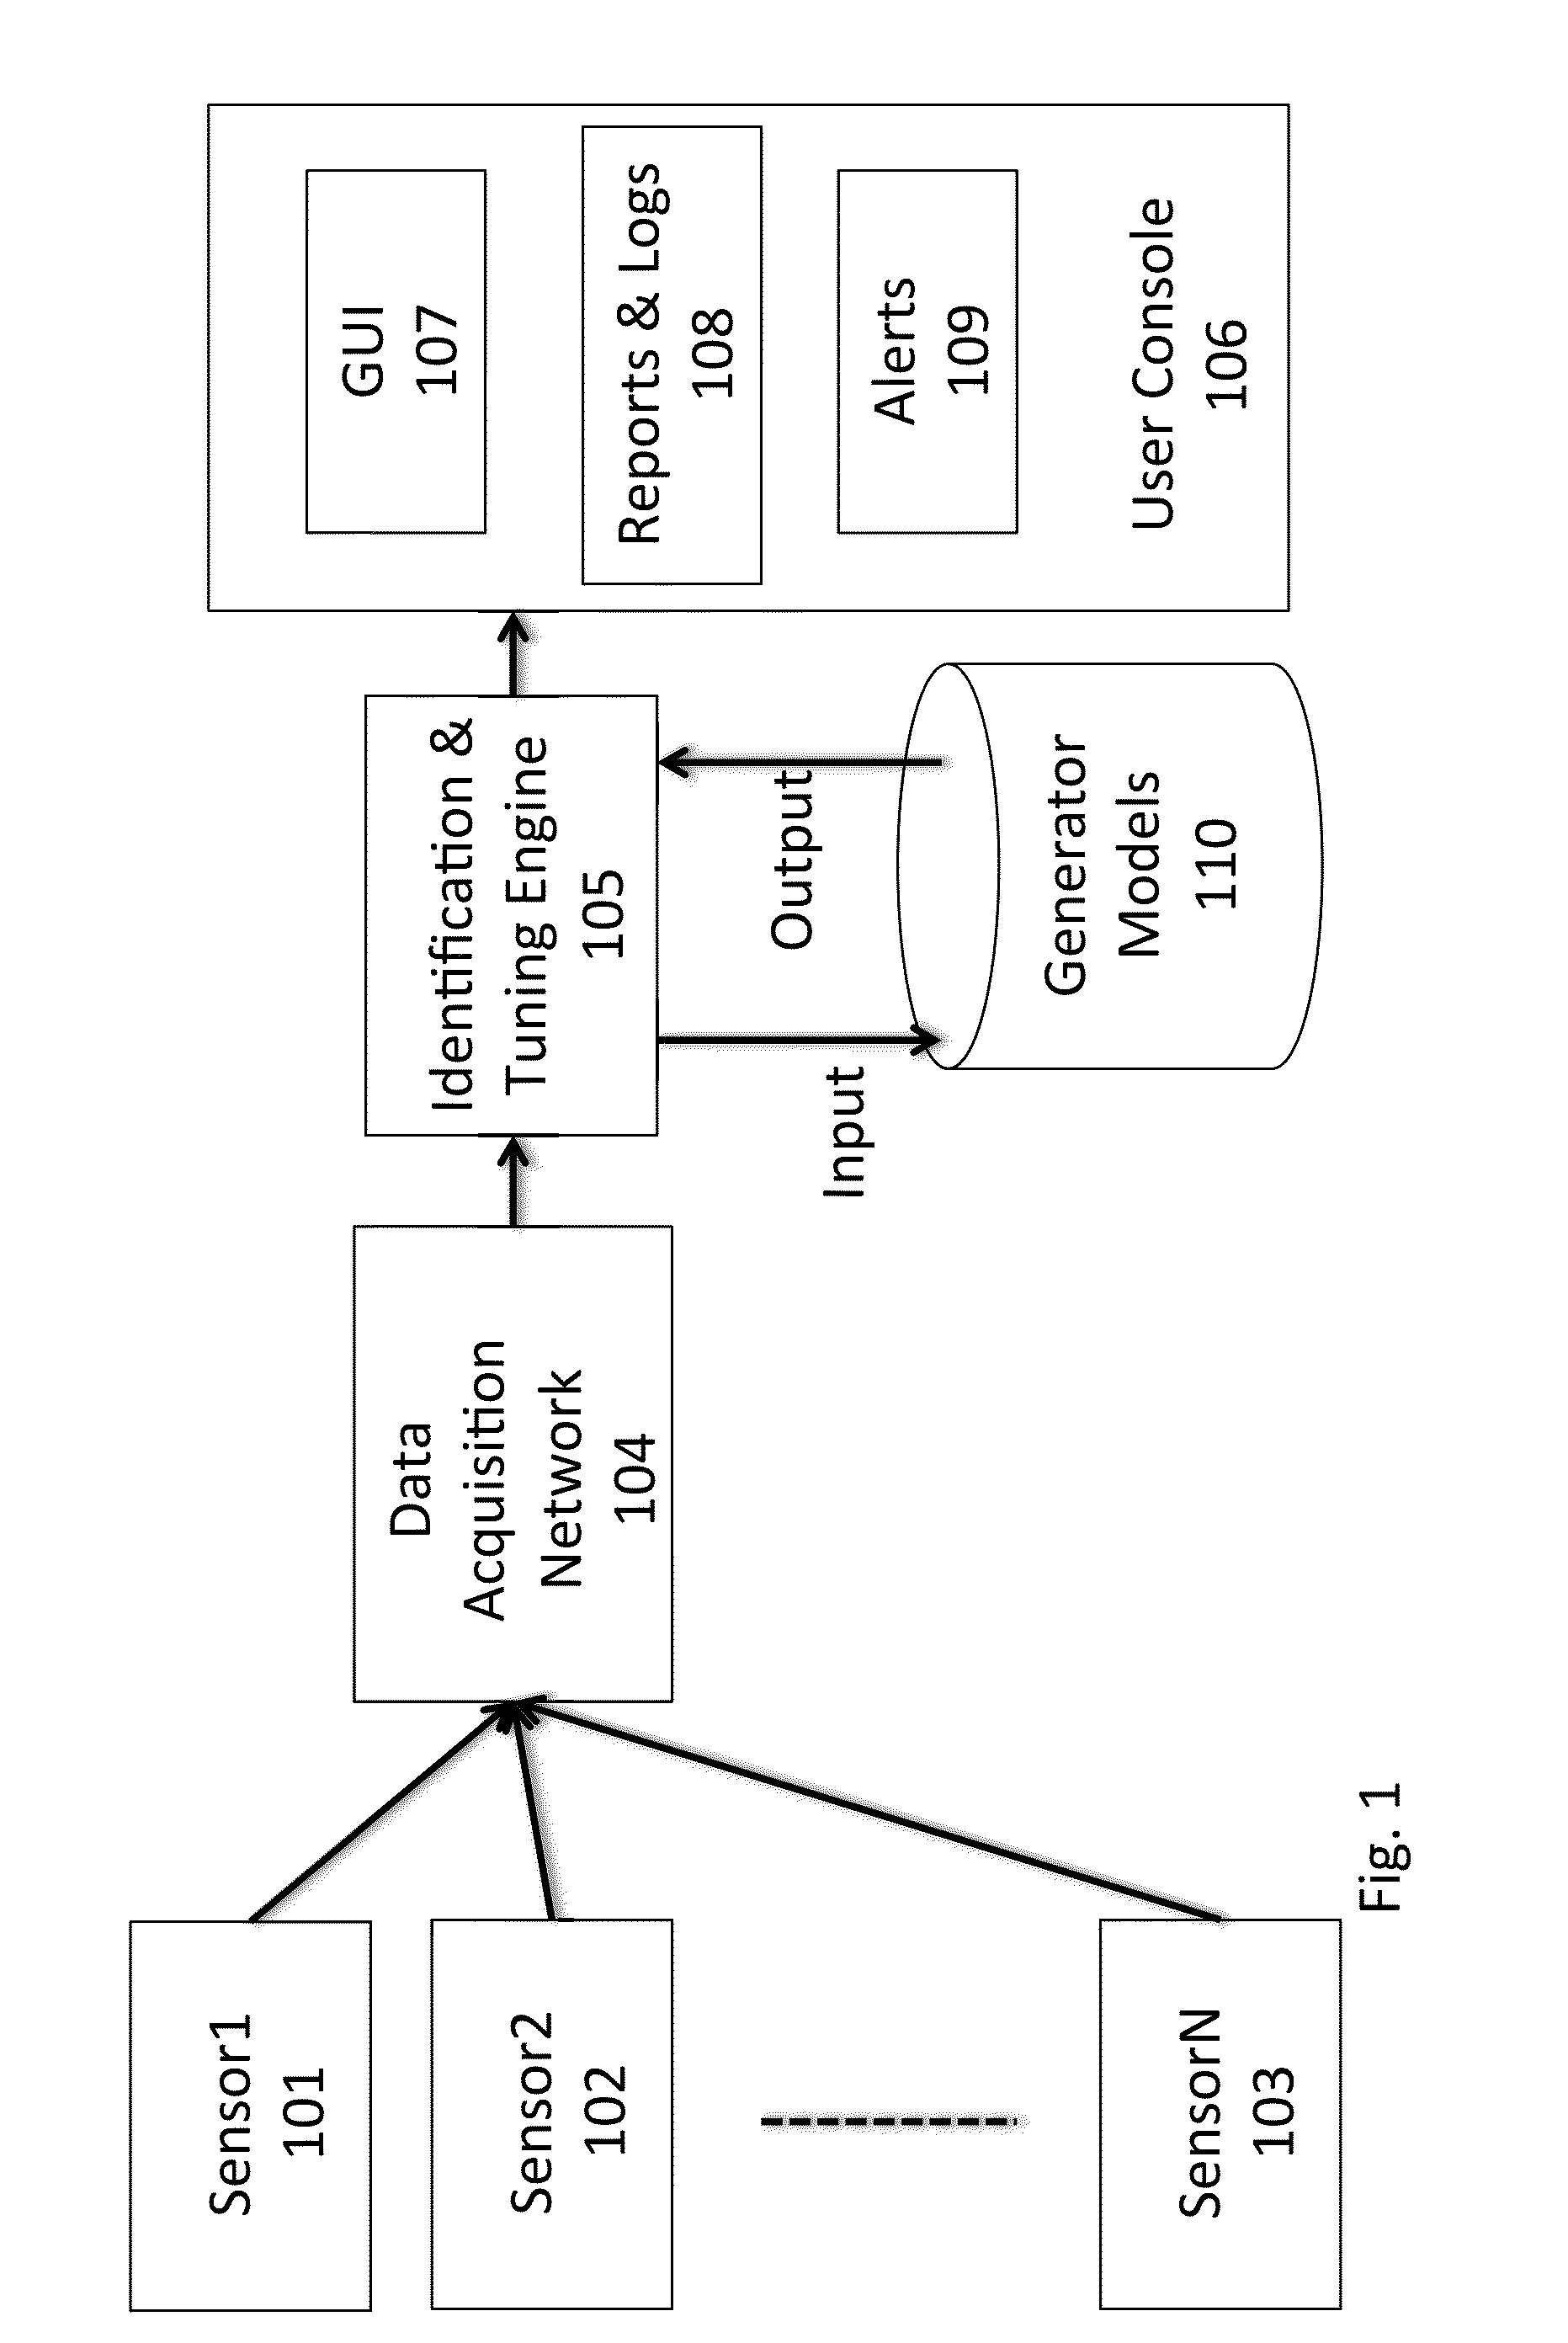 Generator dynamic model parameter estimation and tuning using online data and subspace state space model